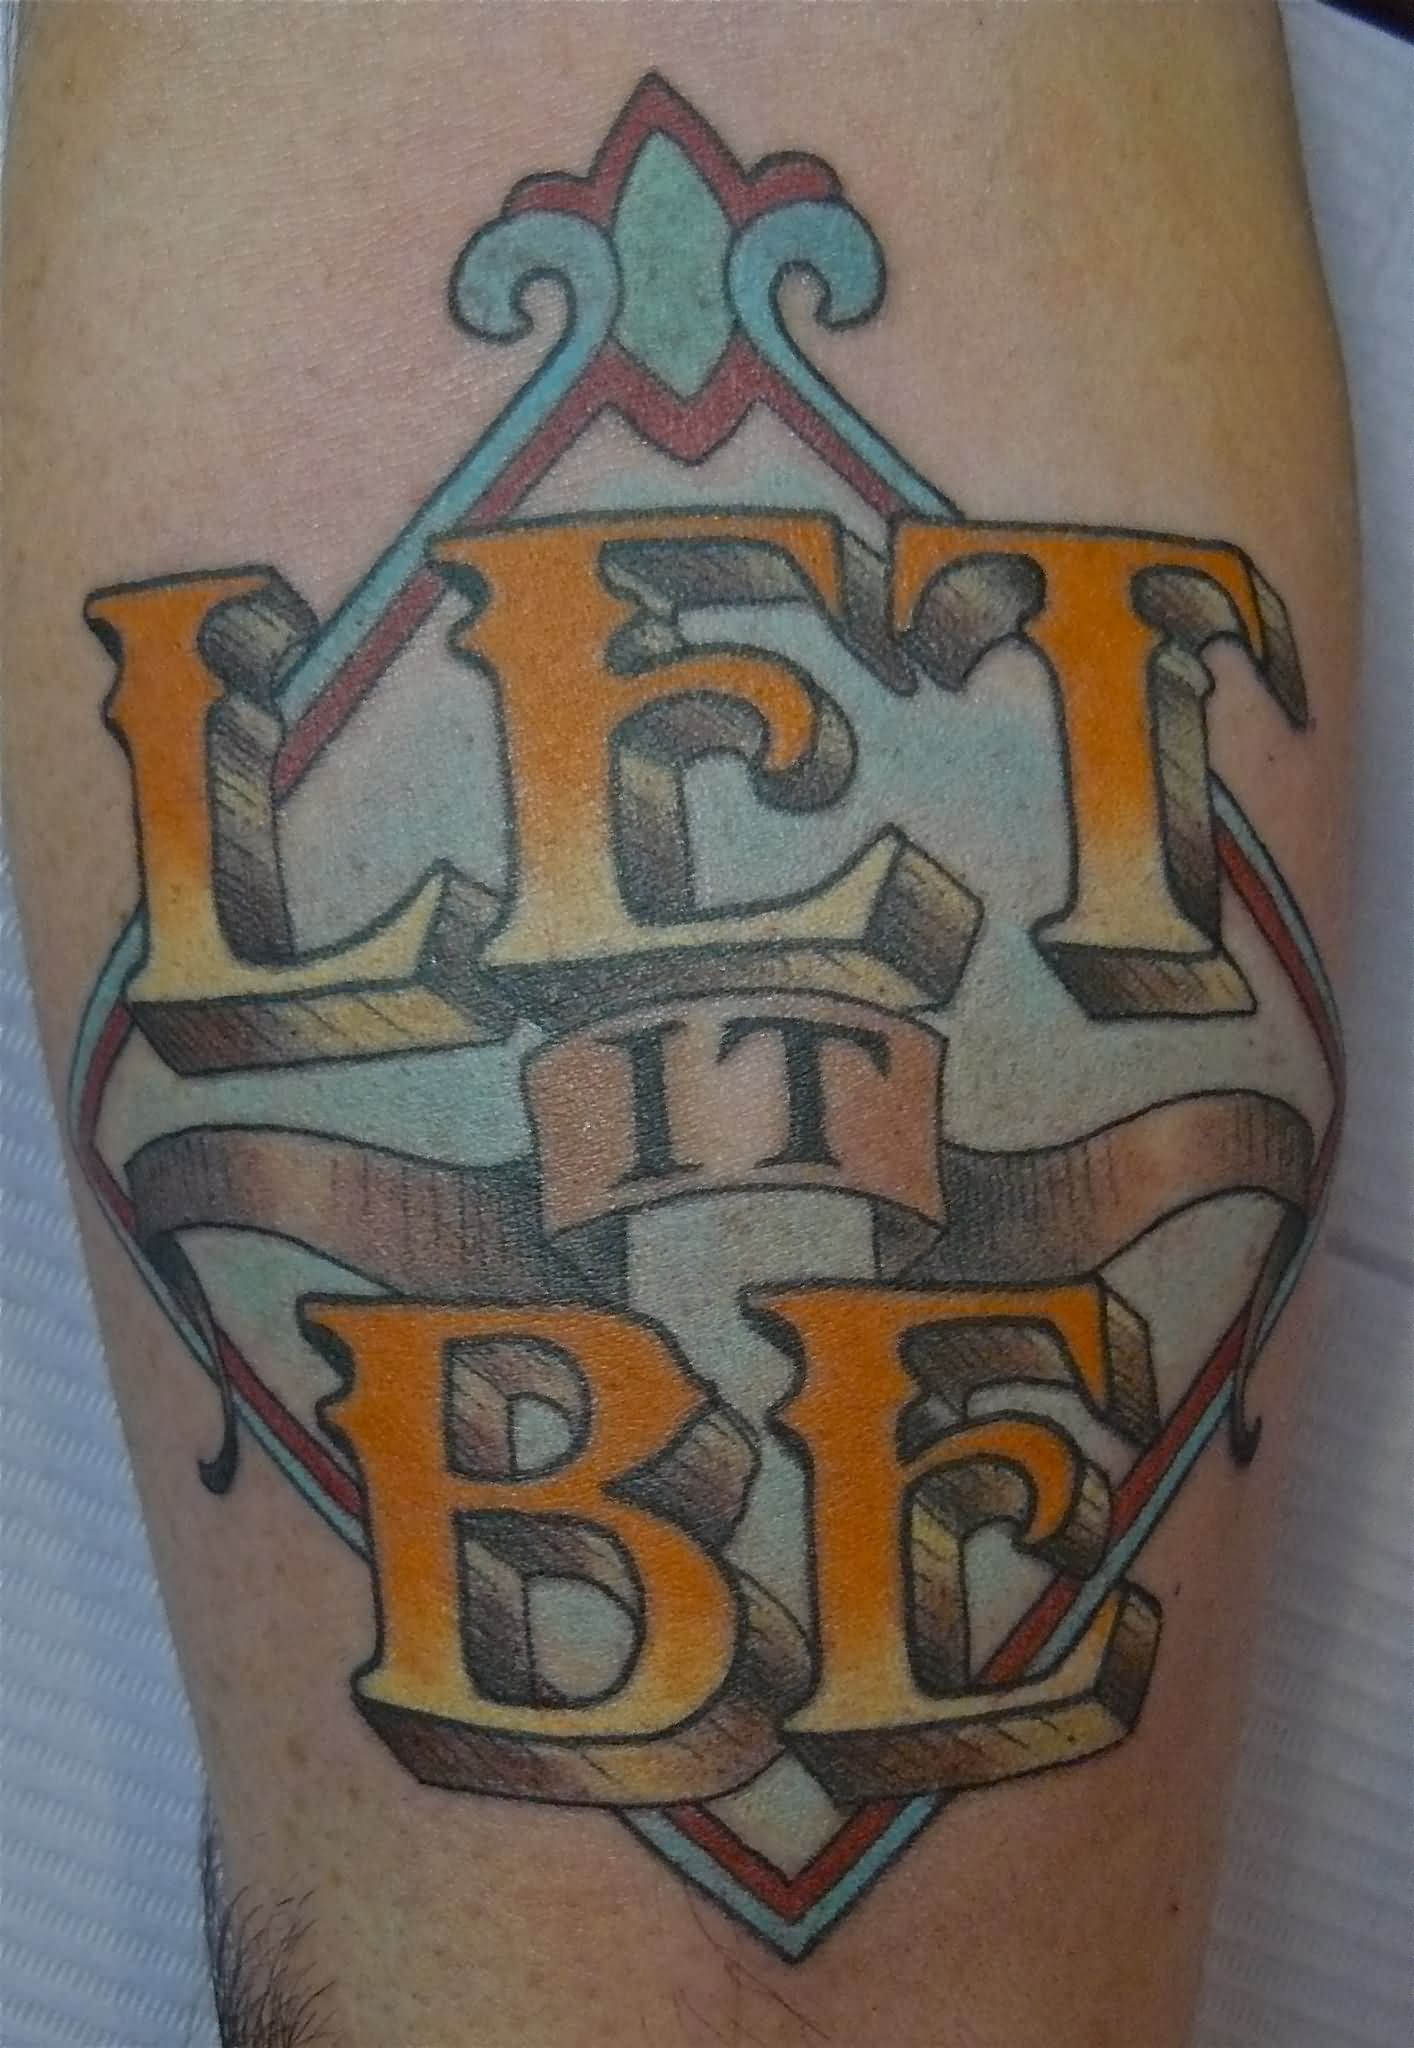 Awesome Let It Be Lettering Tattoo Design For Sleeve By Erick Erickson